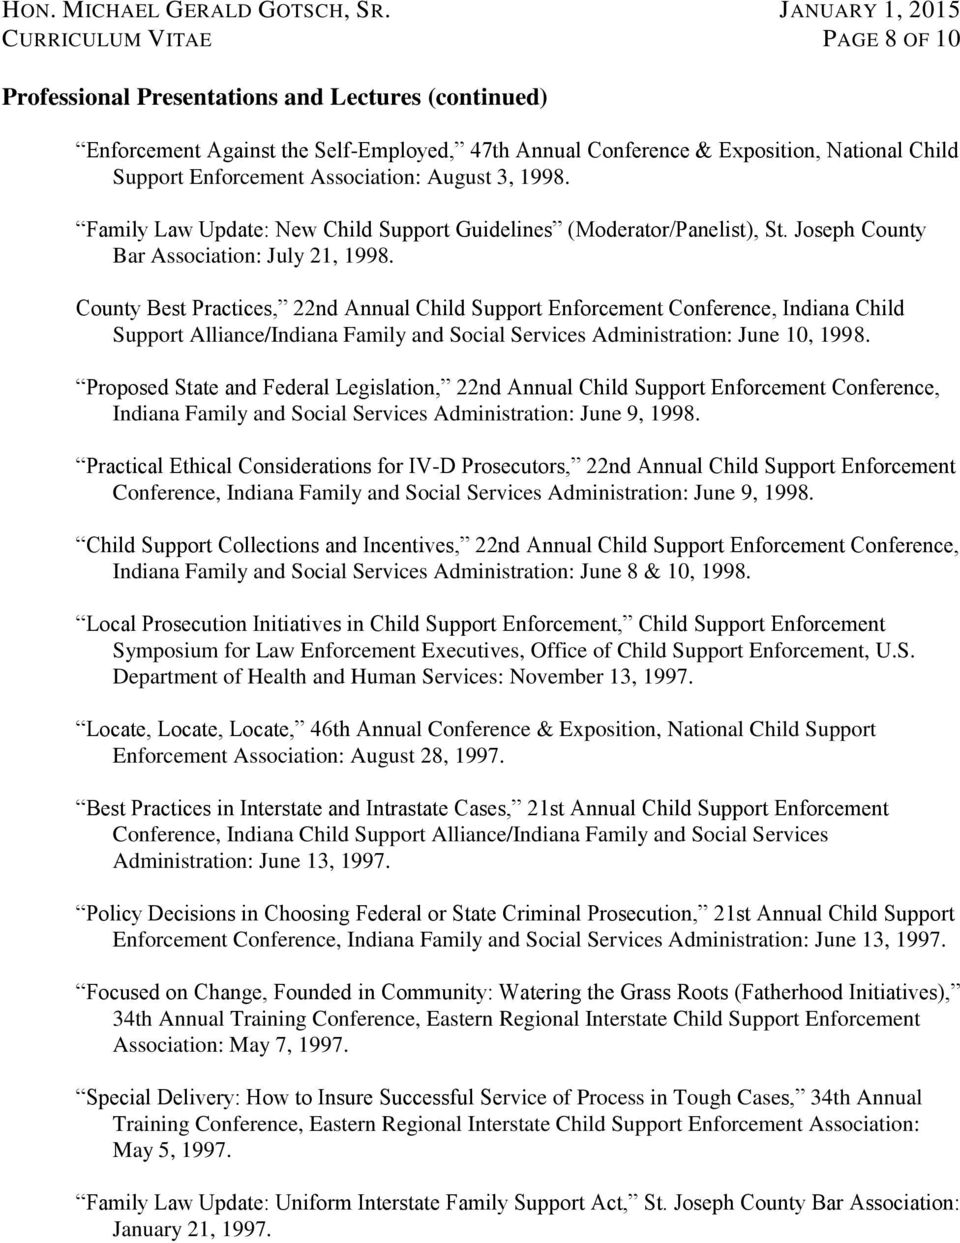 County Best Practices, 22nd Annual Child Support Enforcement Conference, Indiana Child Support Alliance/Indiana Family and Social Services Administration: June 10, 1998.